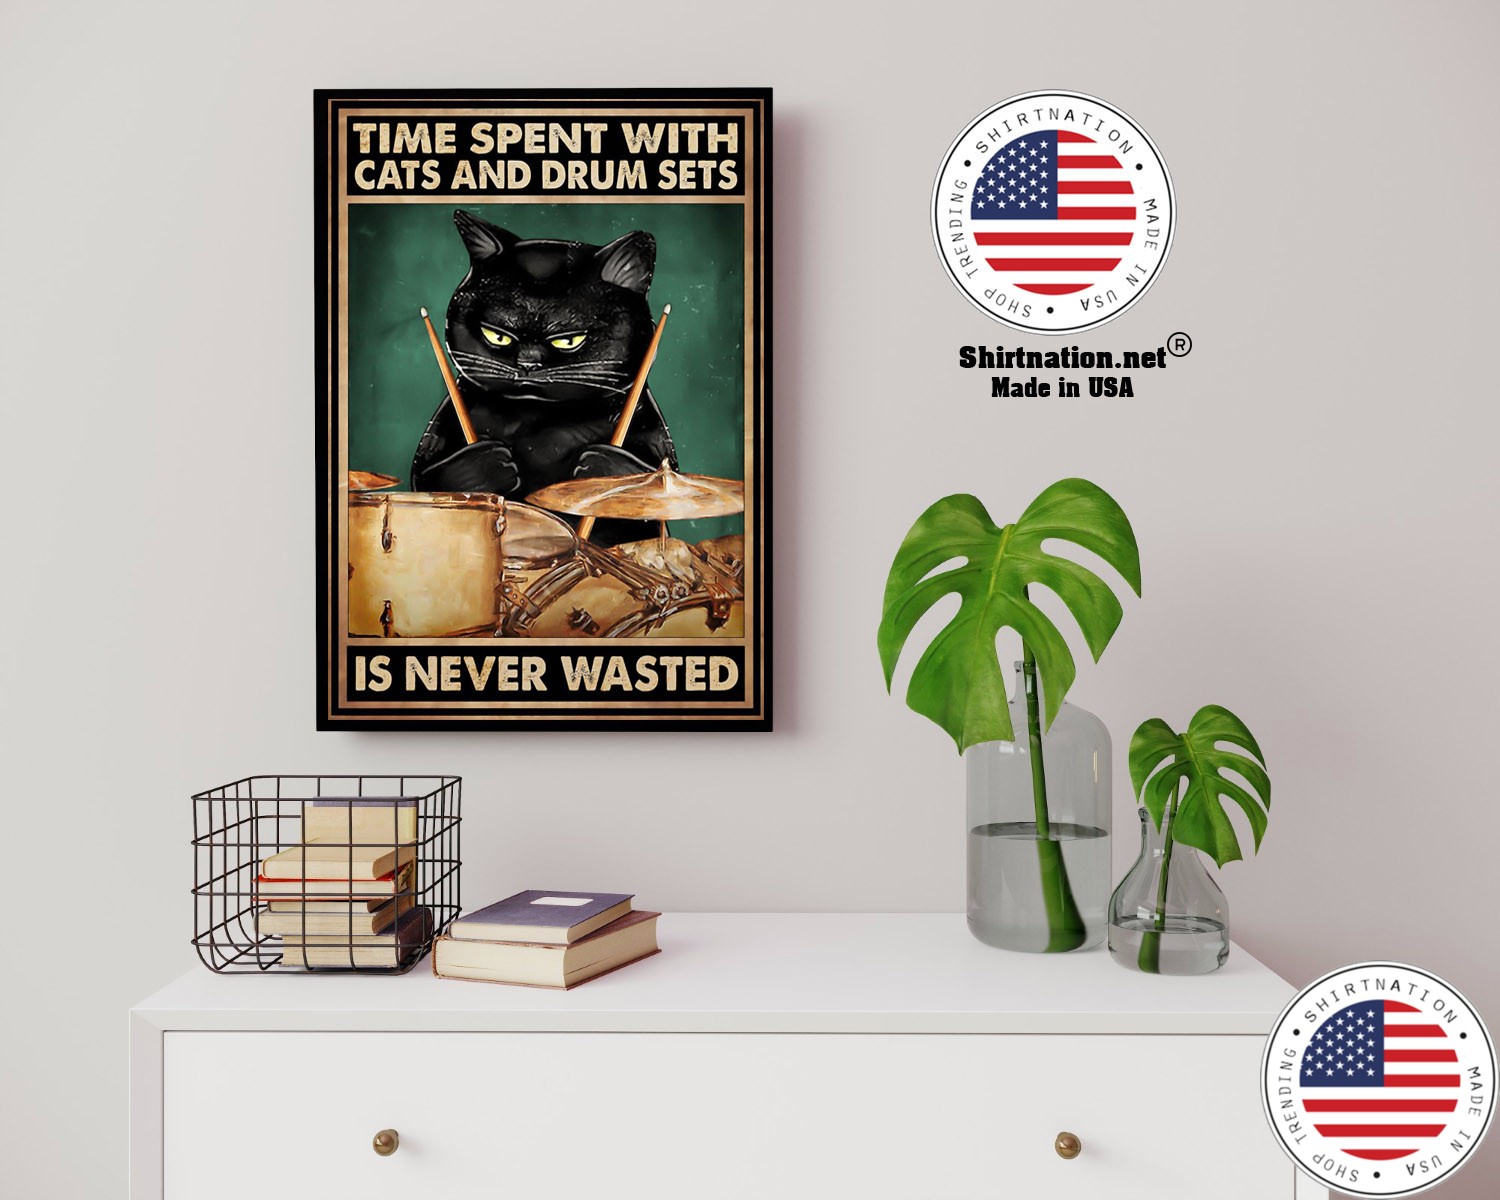 Time spent with cats and drum sets is never wasted poster 18